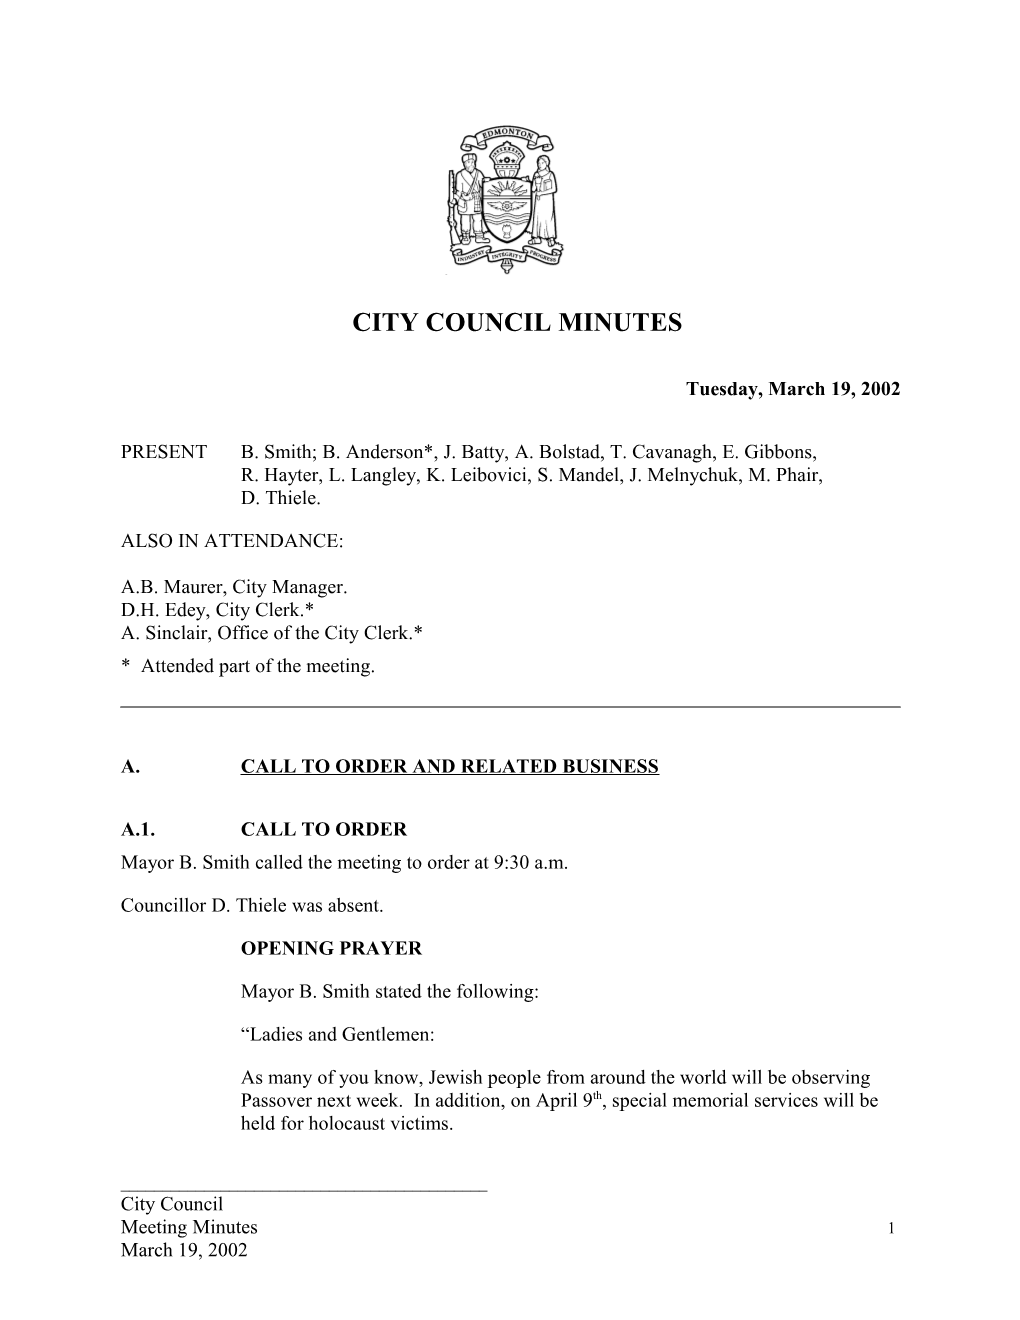 Minutes for City Council March 19, 2002 Meeting